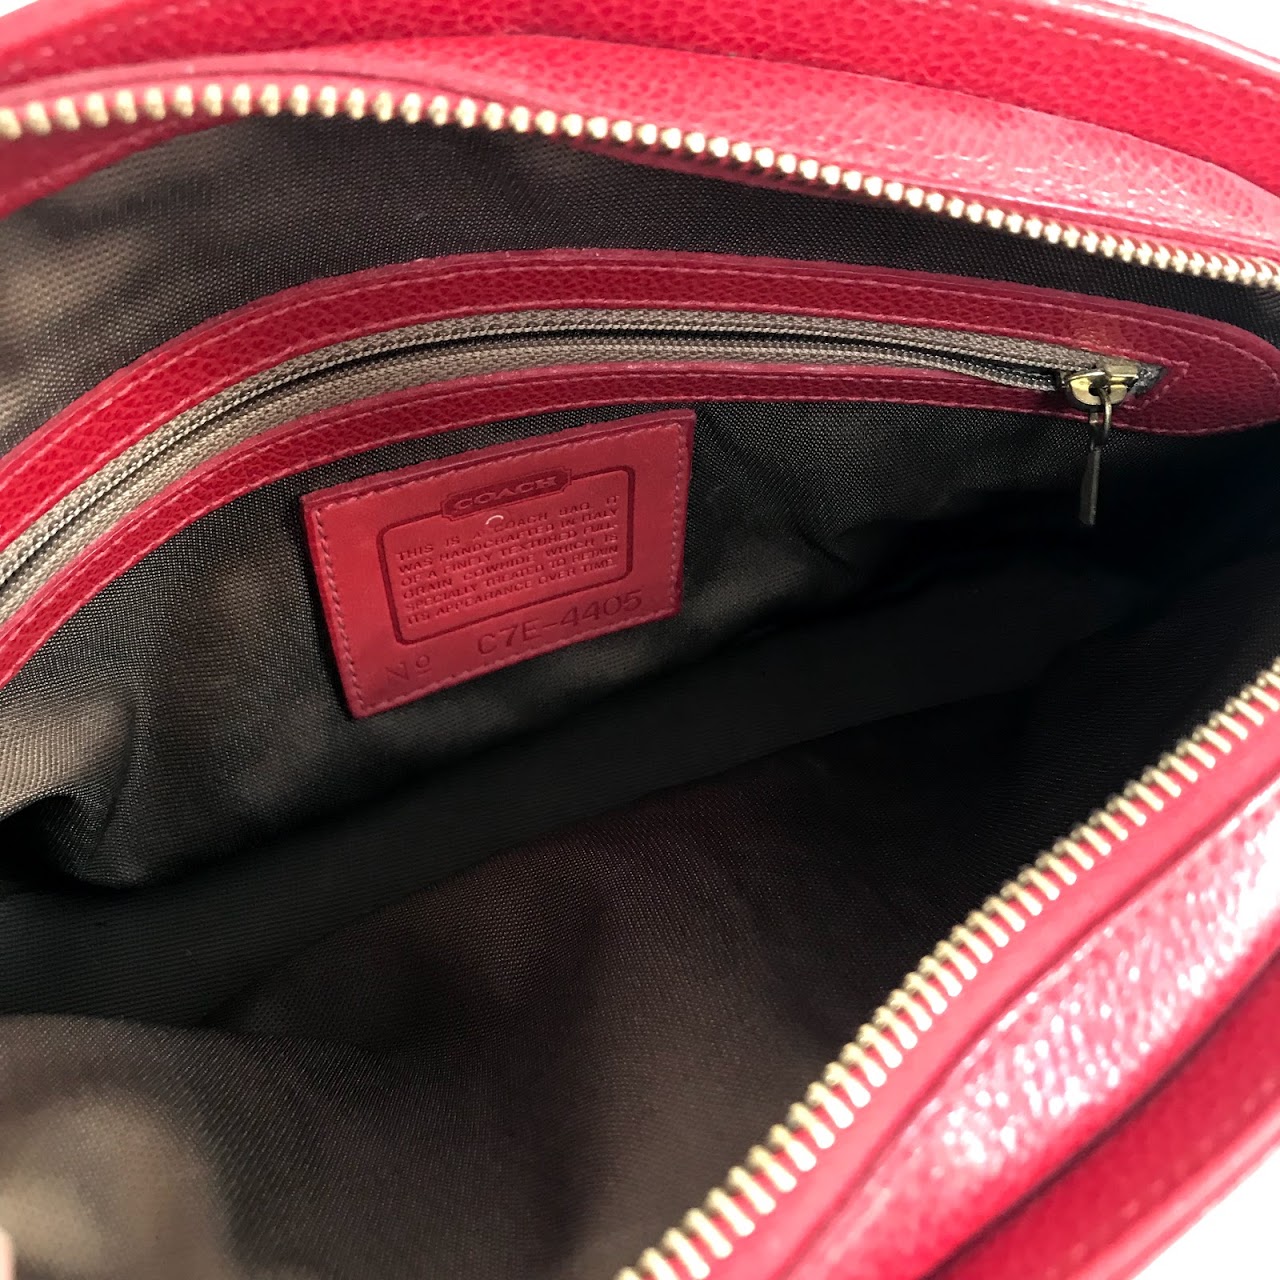 Coach Red Leather Crossbody Bag